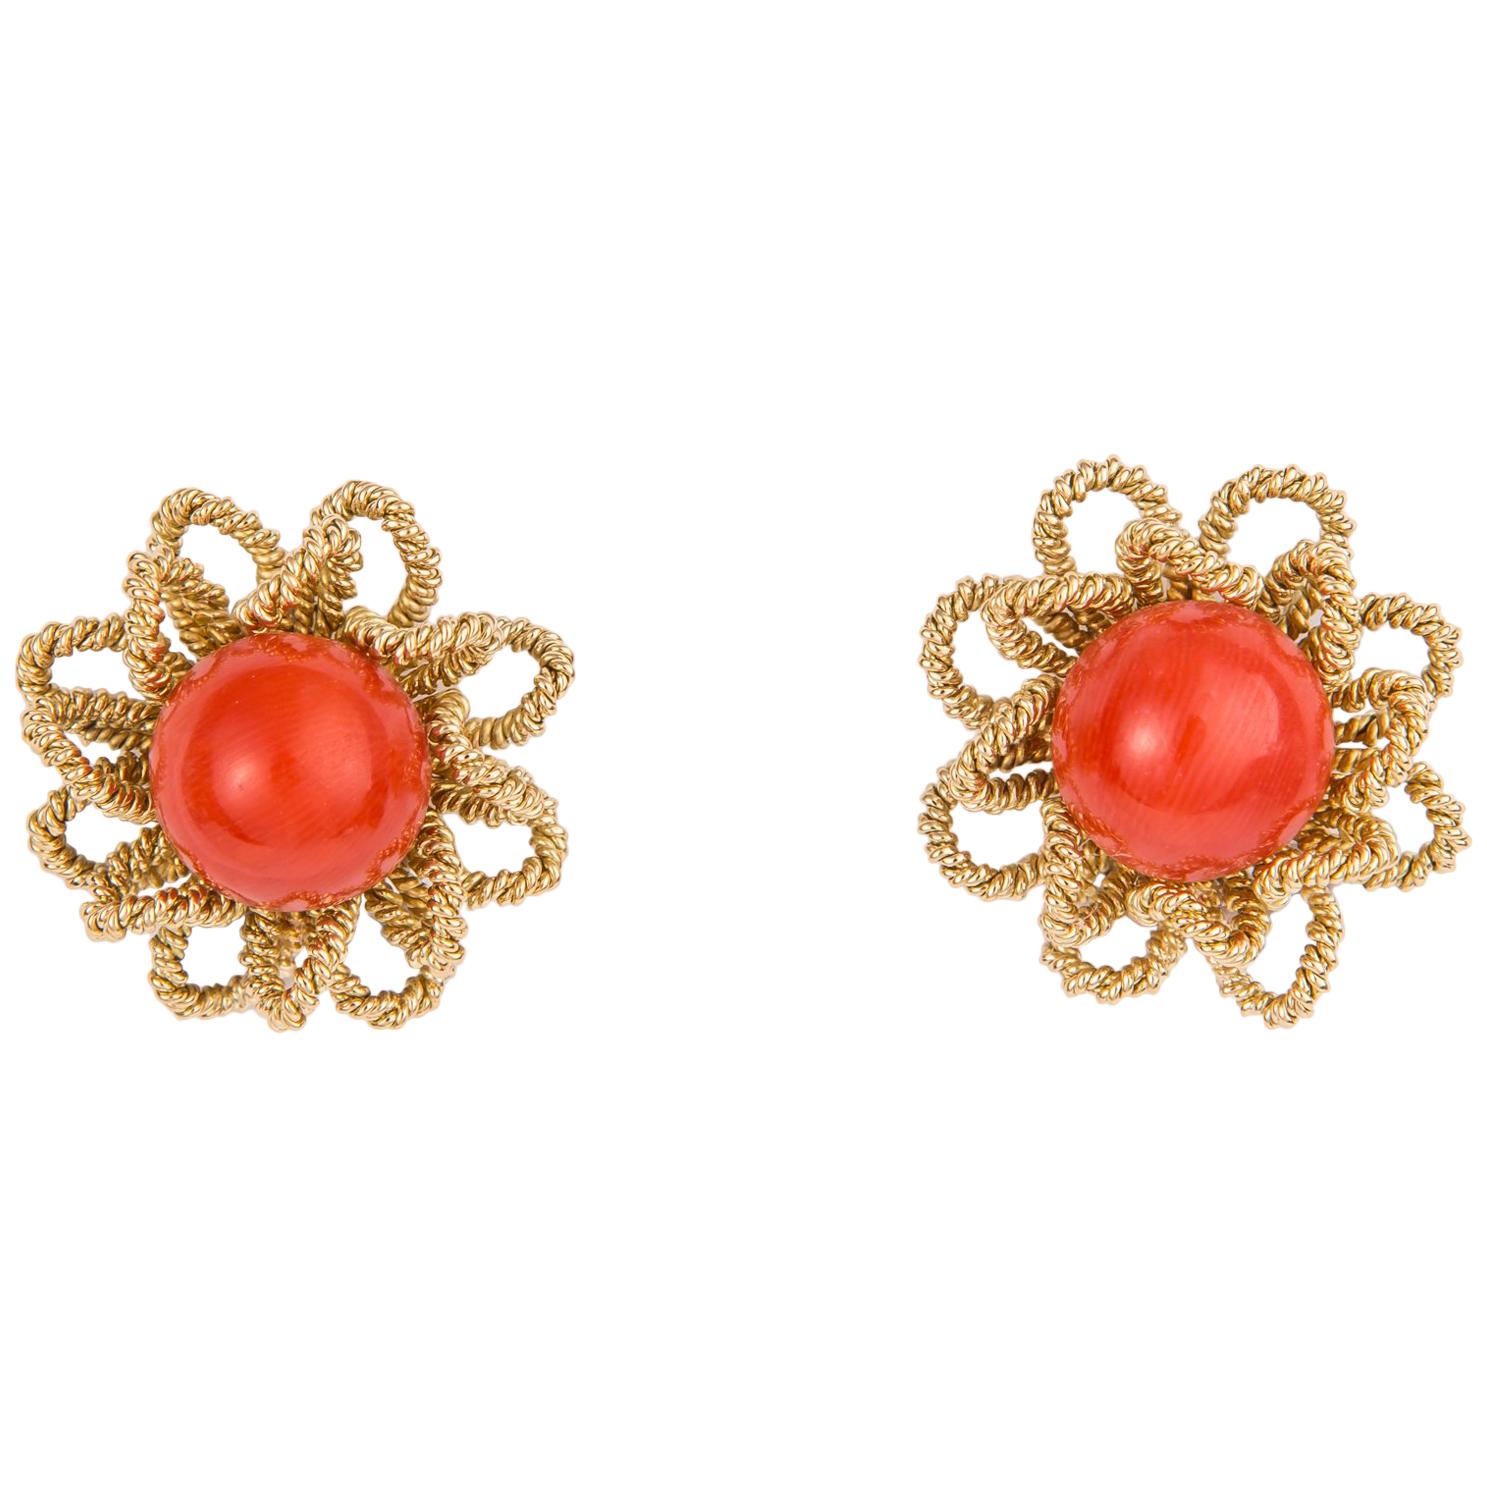 Chic Gold and Coral Flower Motif Earrings